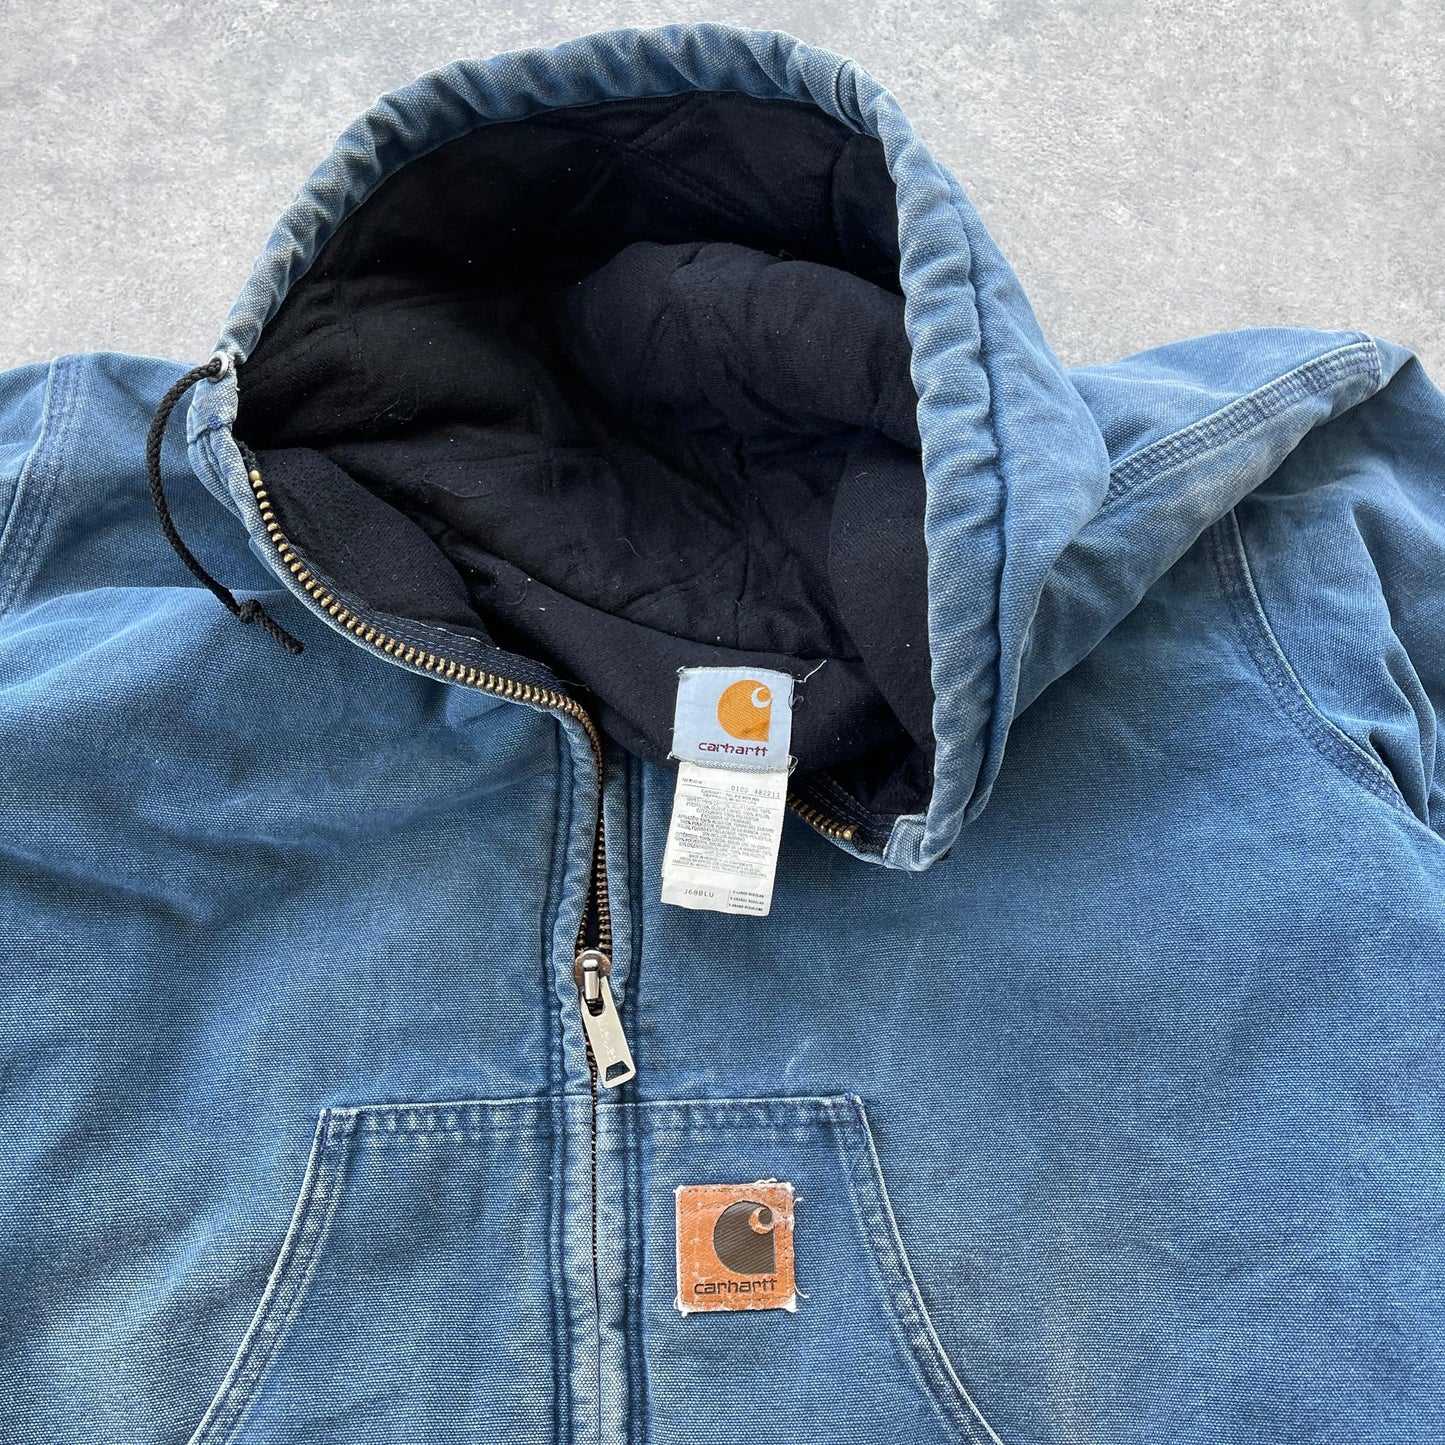 Carhartt 2000 heavyweight active hooded jacket (XL) - Known Source